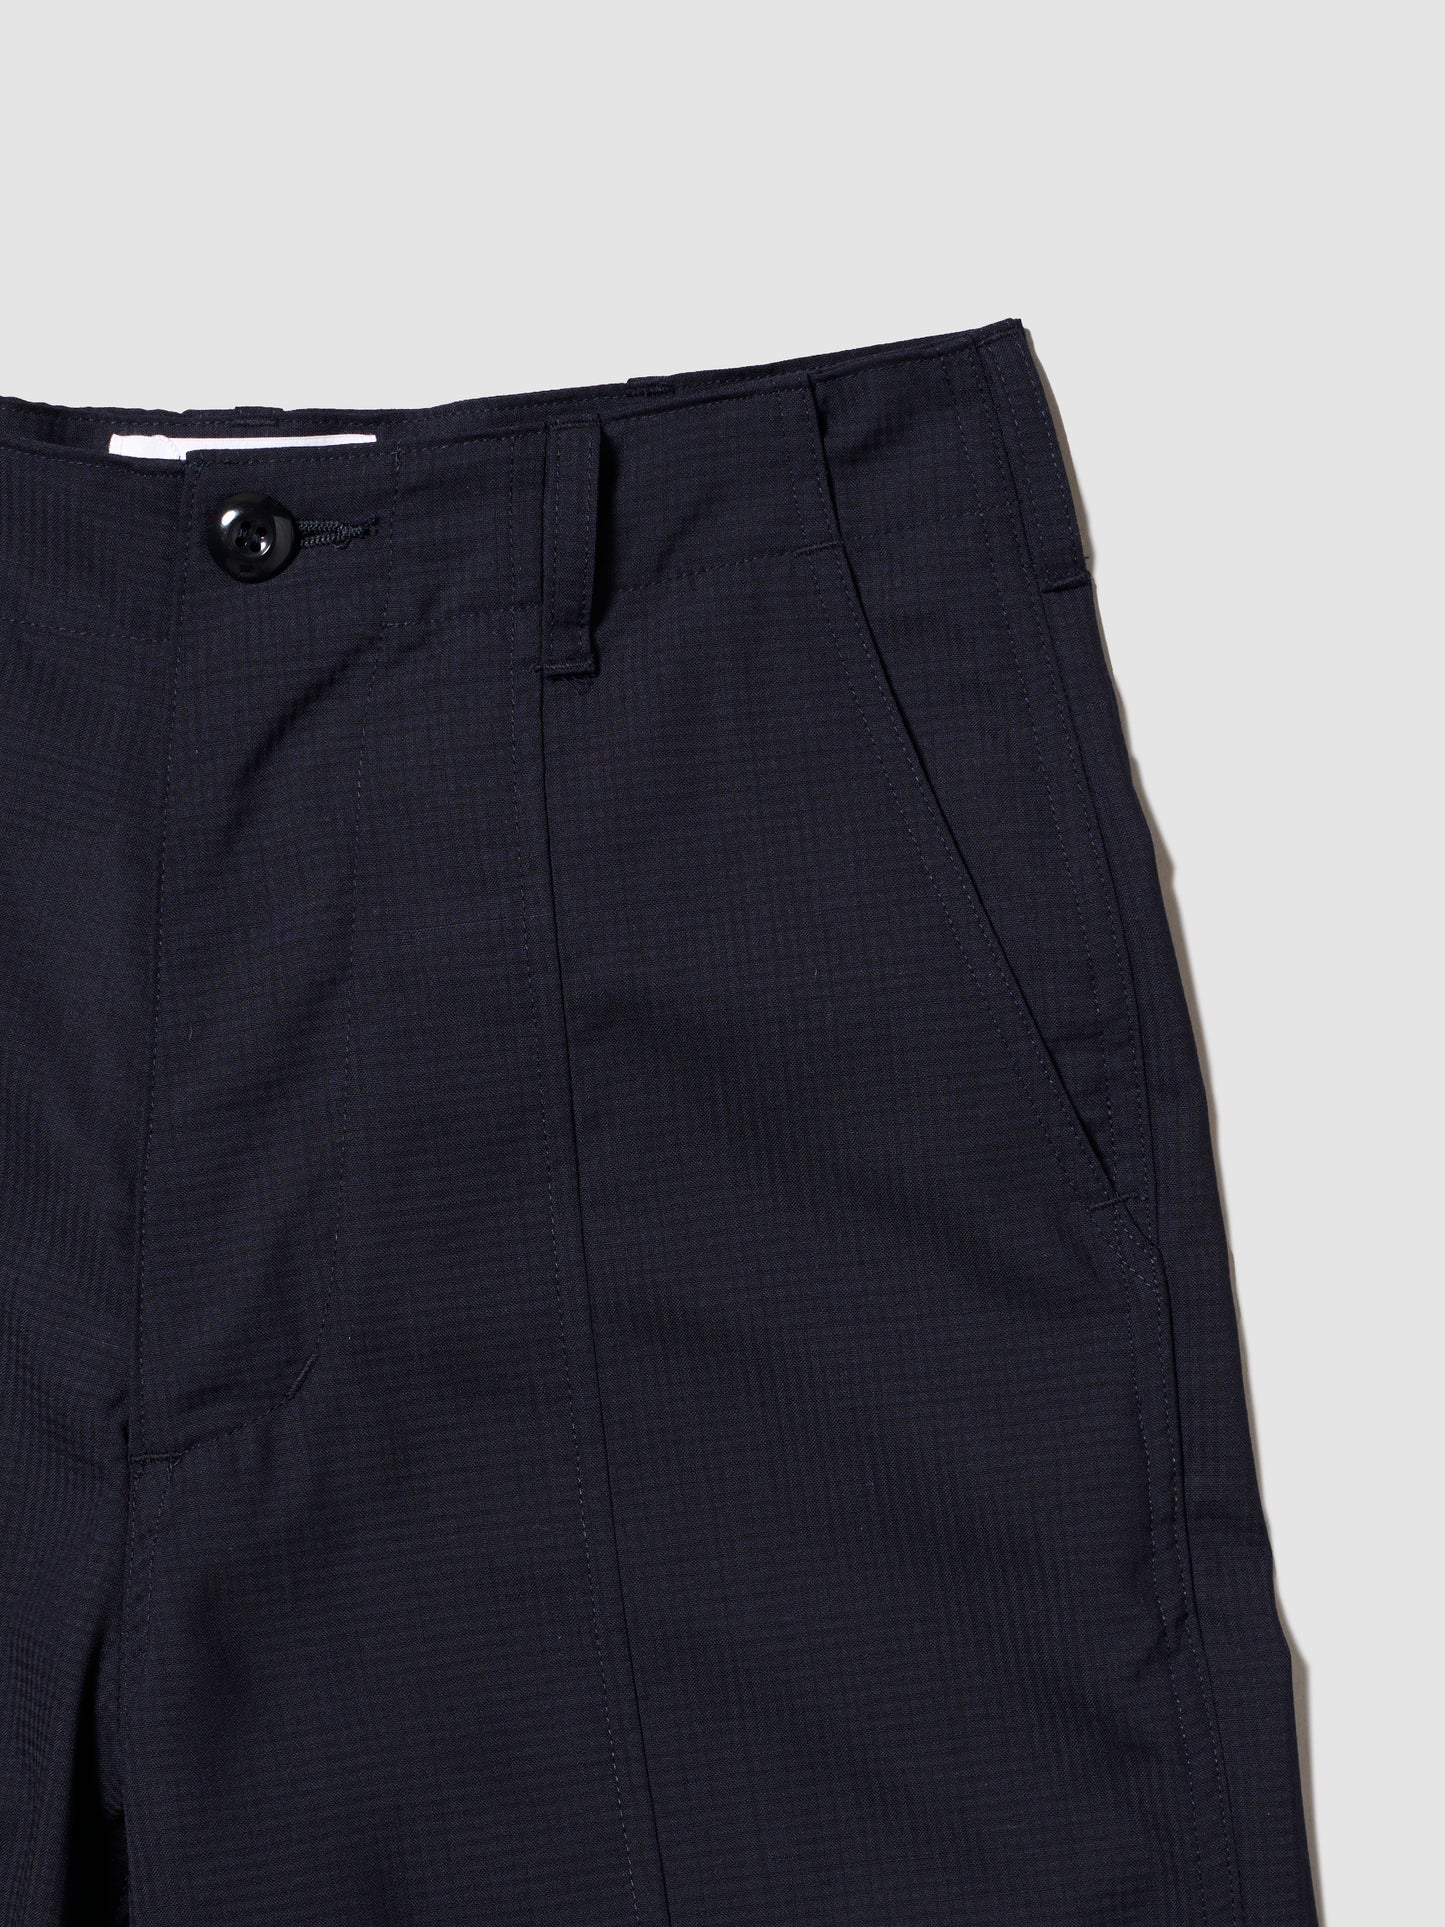 SEAMED CINCH PANTS/ MIDNIGHT CHECK